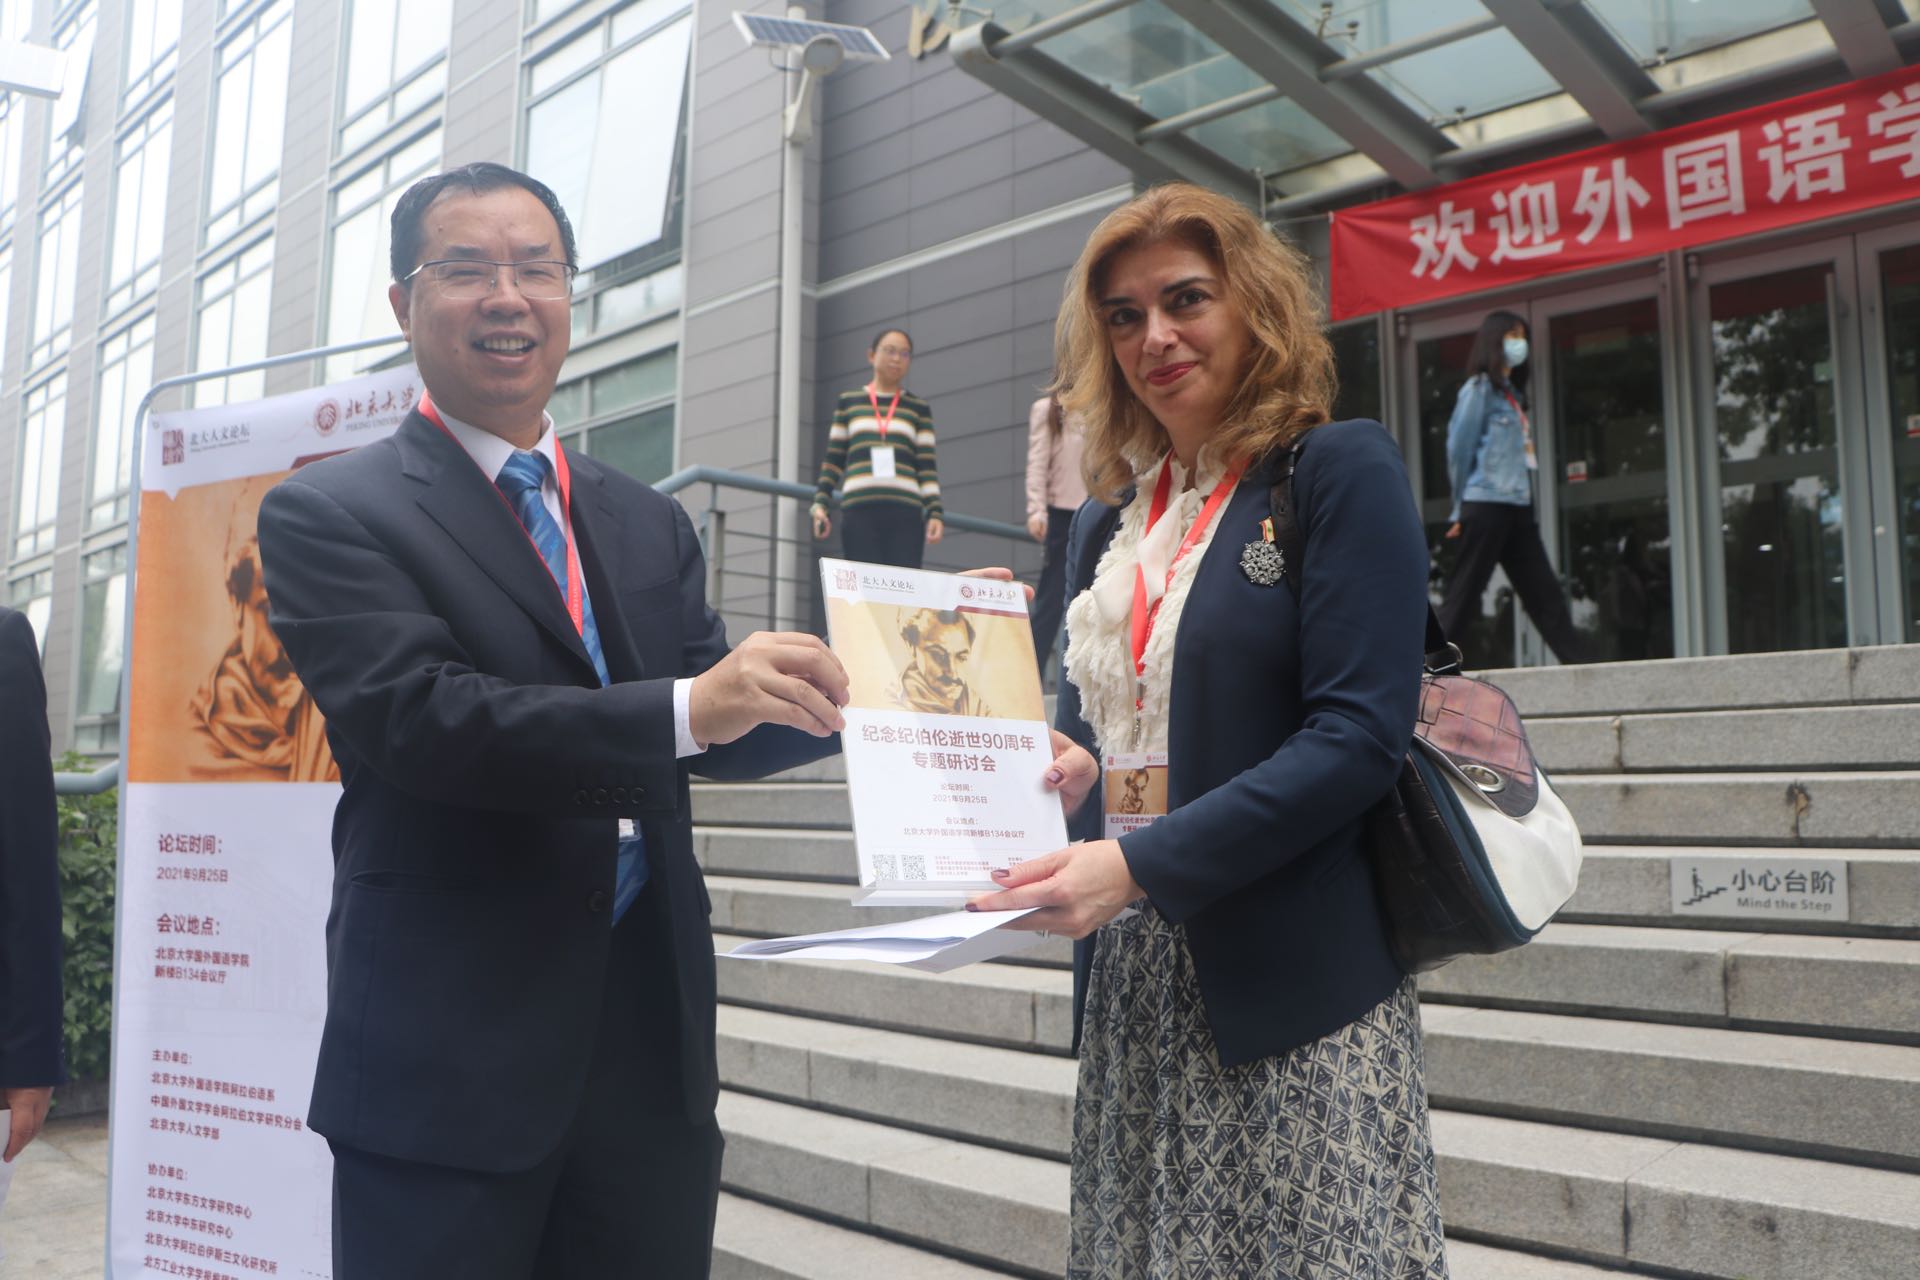 The Ambassador of Lebanon in China Milia Jabbour and Professor Lin Fengmin, the president of the Association of Arab Literature in China